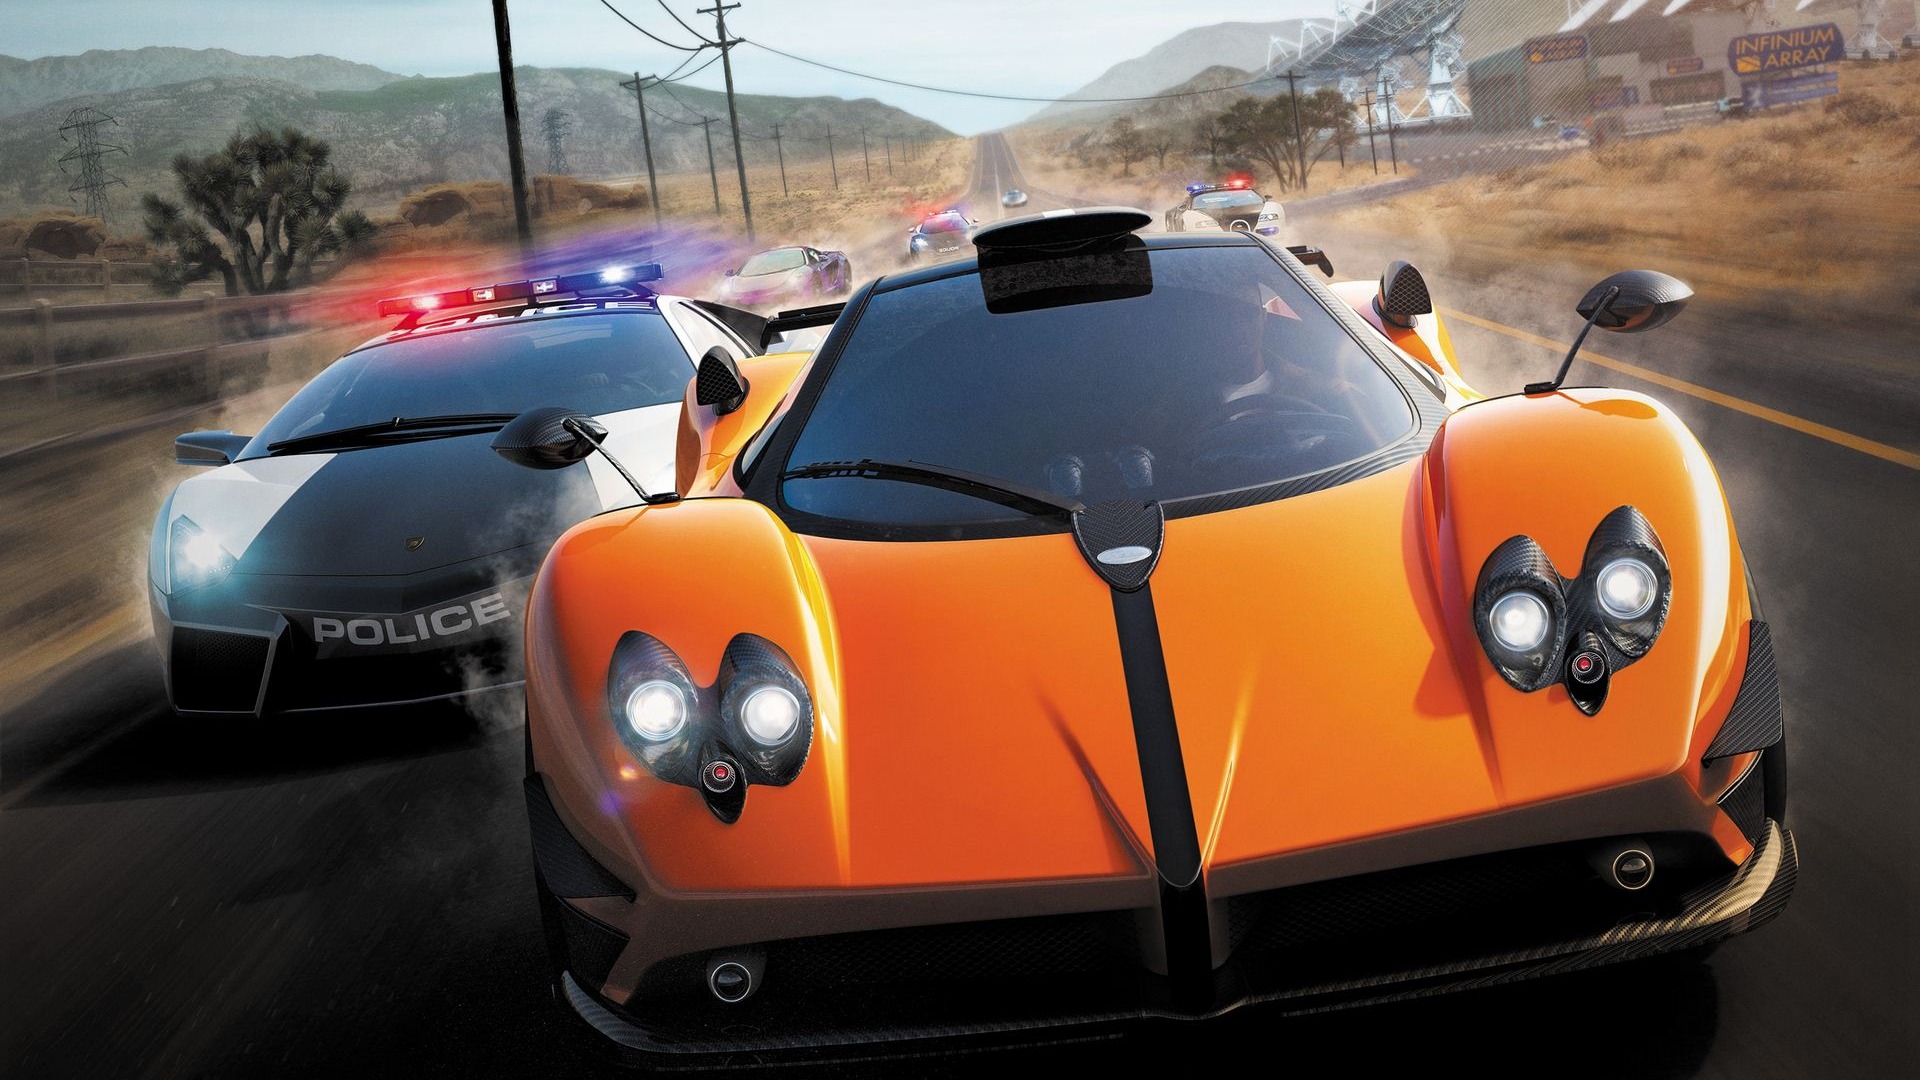 Need for Speed: Hot Pursuit 极品飞车14：热力追踪2 - 1920x1080